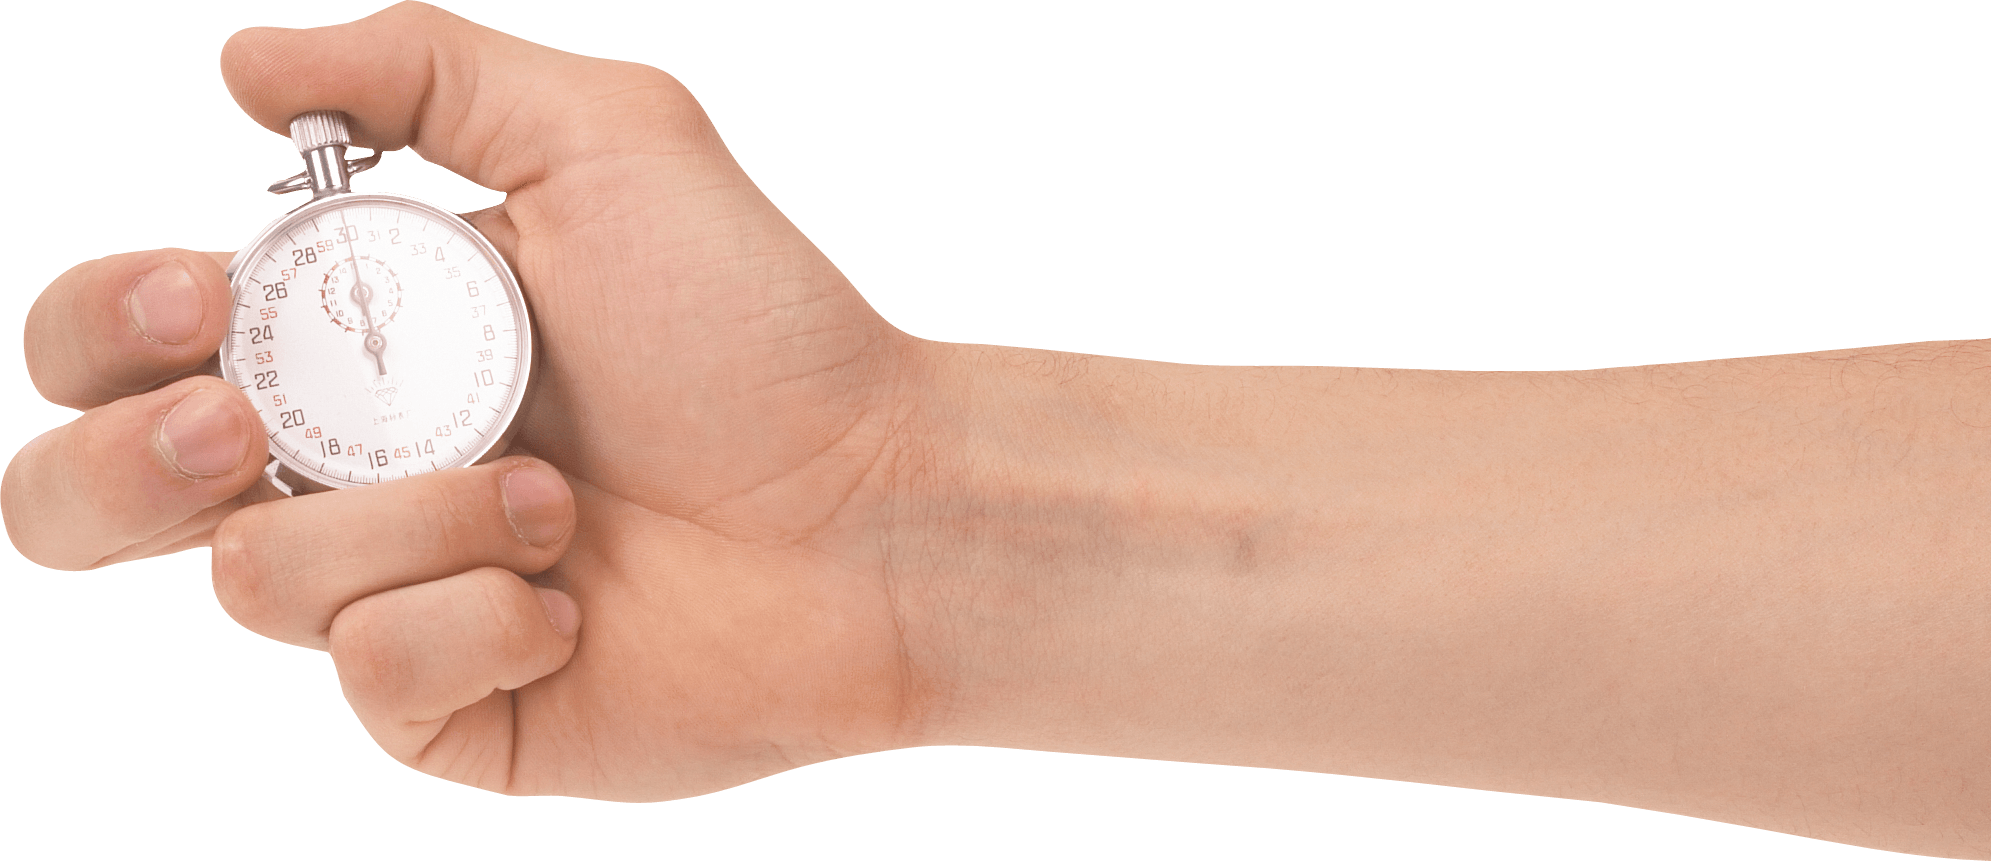 Clipart key hand holding. Stopwatch transparent png stickpng